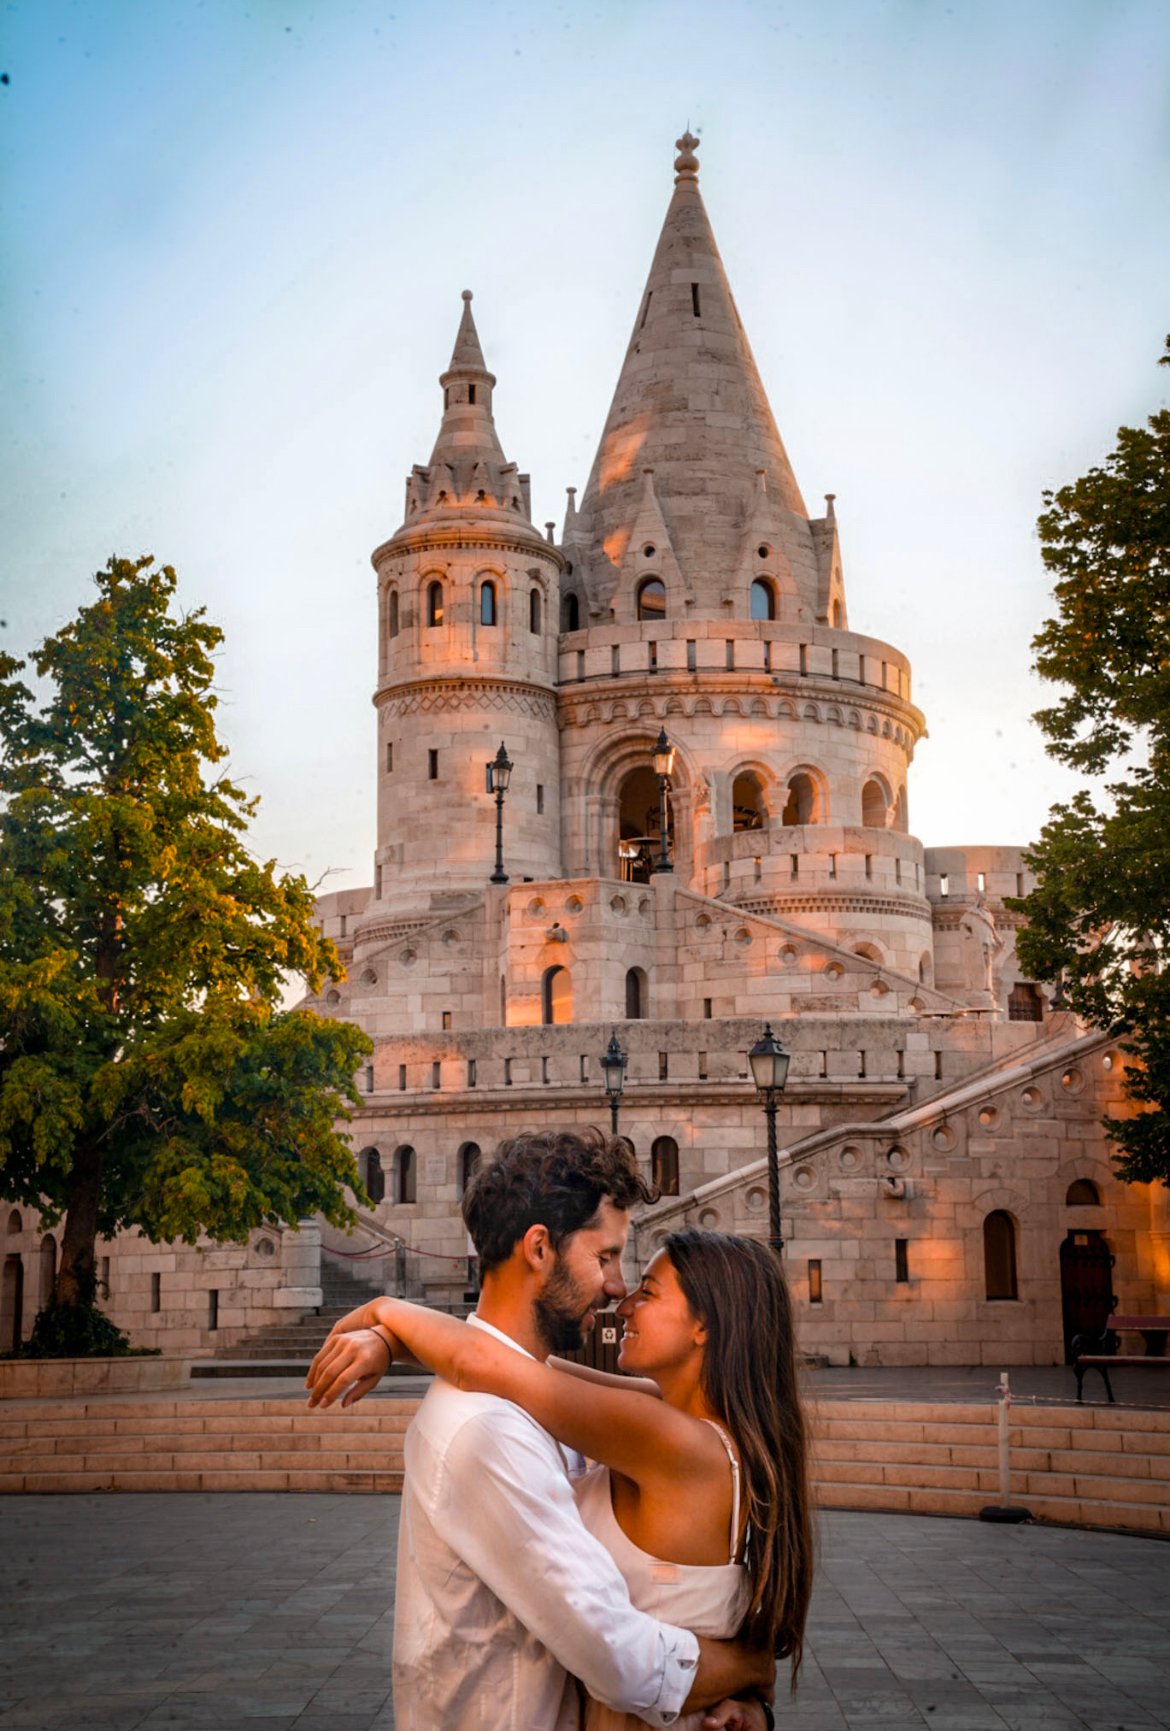 Fisherman's Bastion, 10 top things to do in Budapest